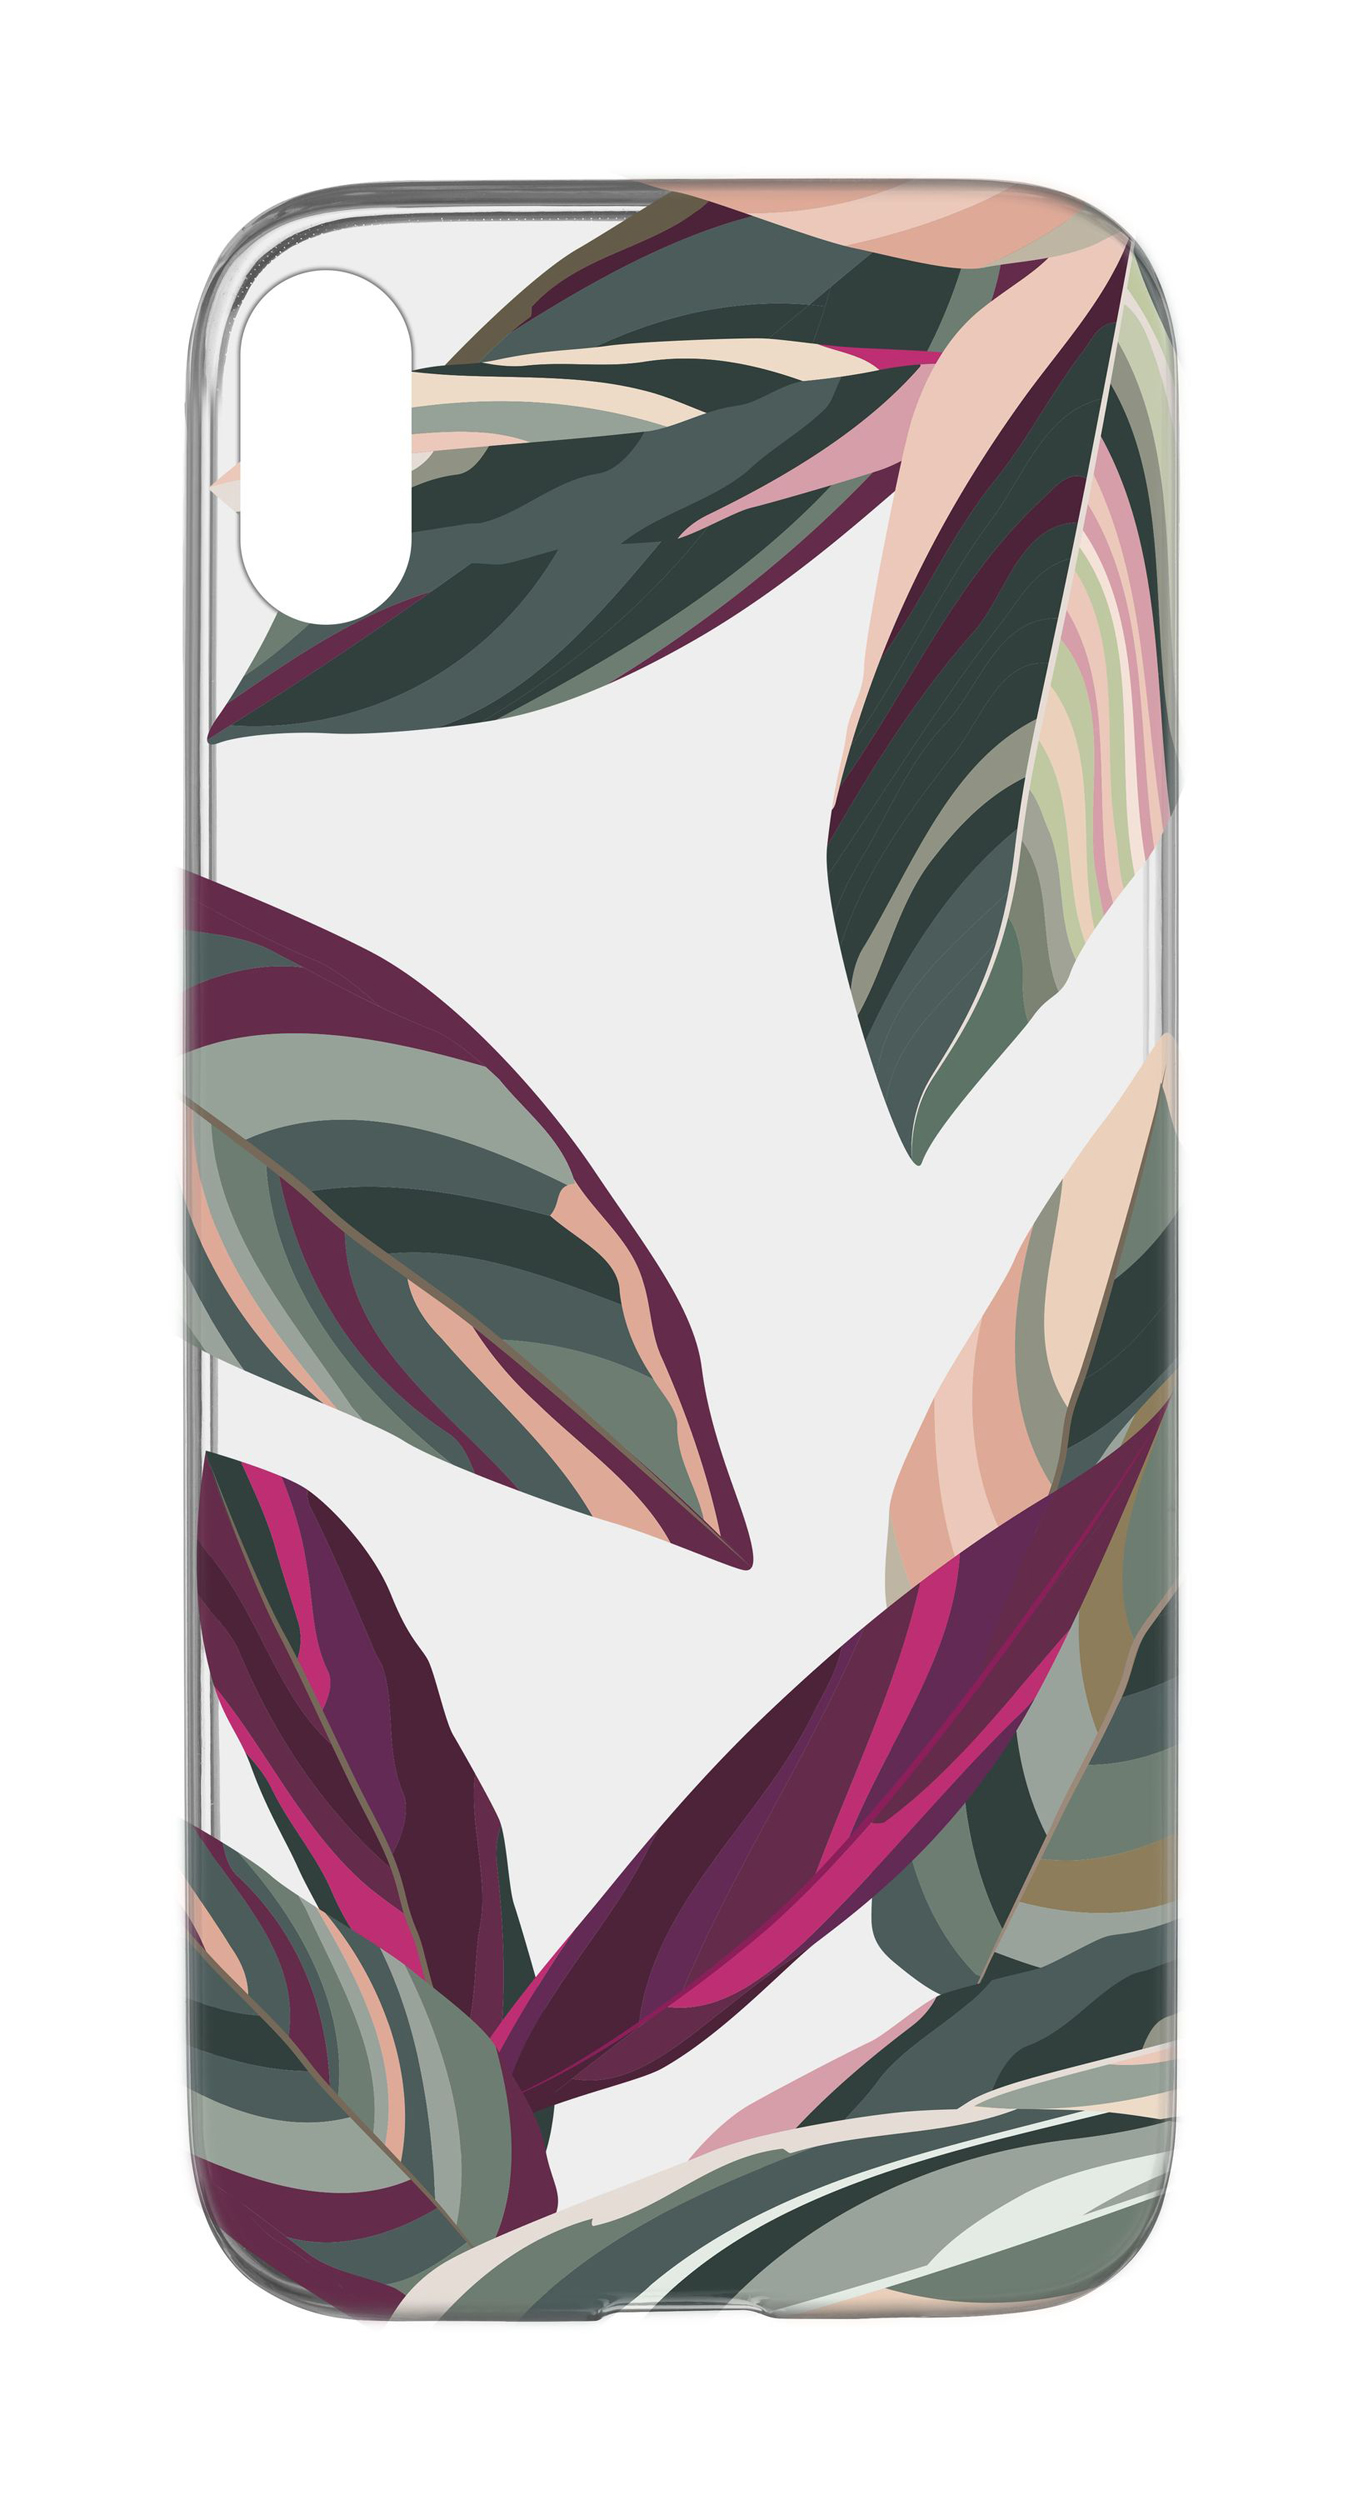 iPhone X/XS, case style, forest